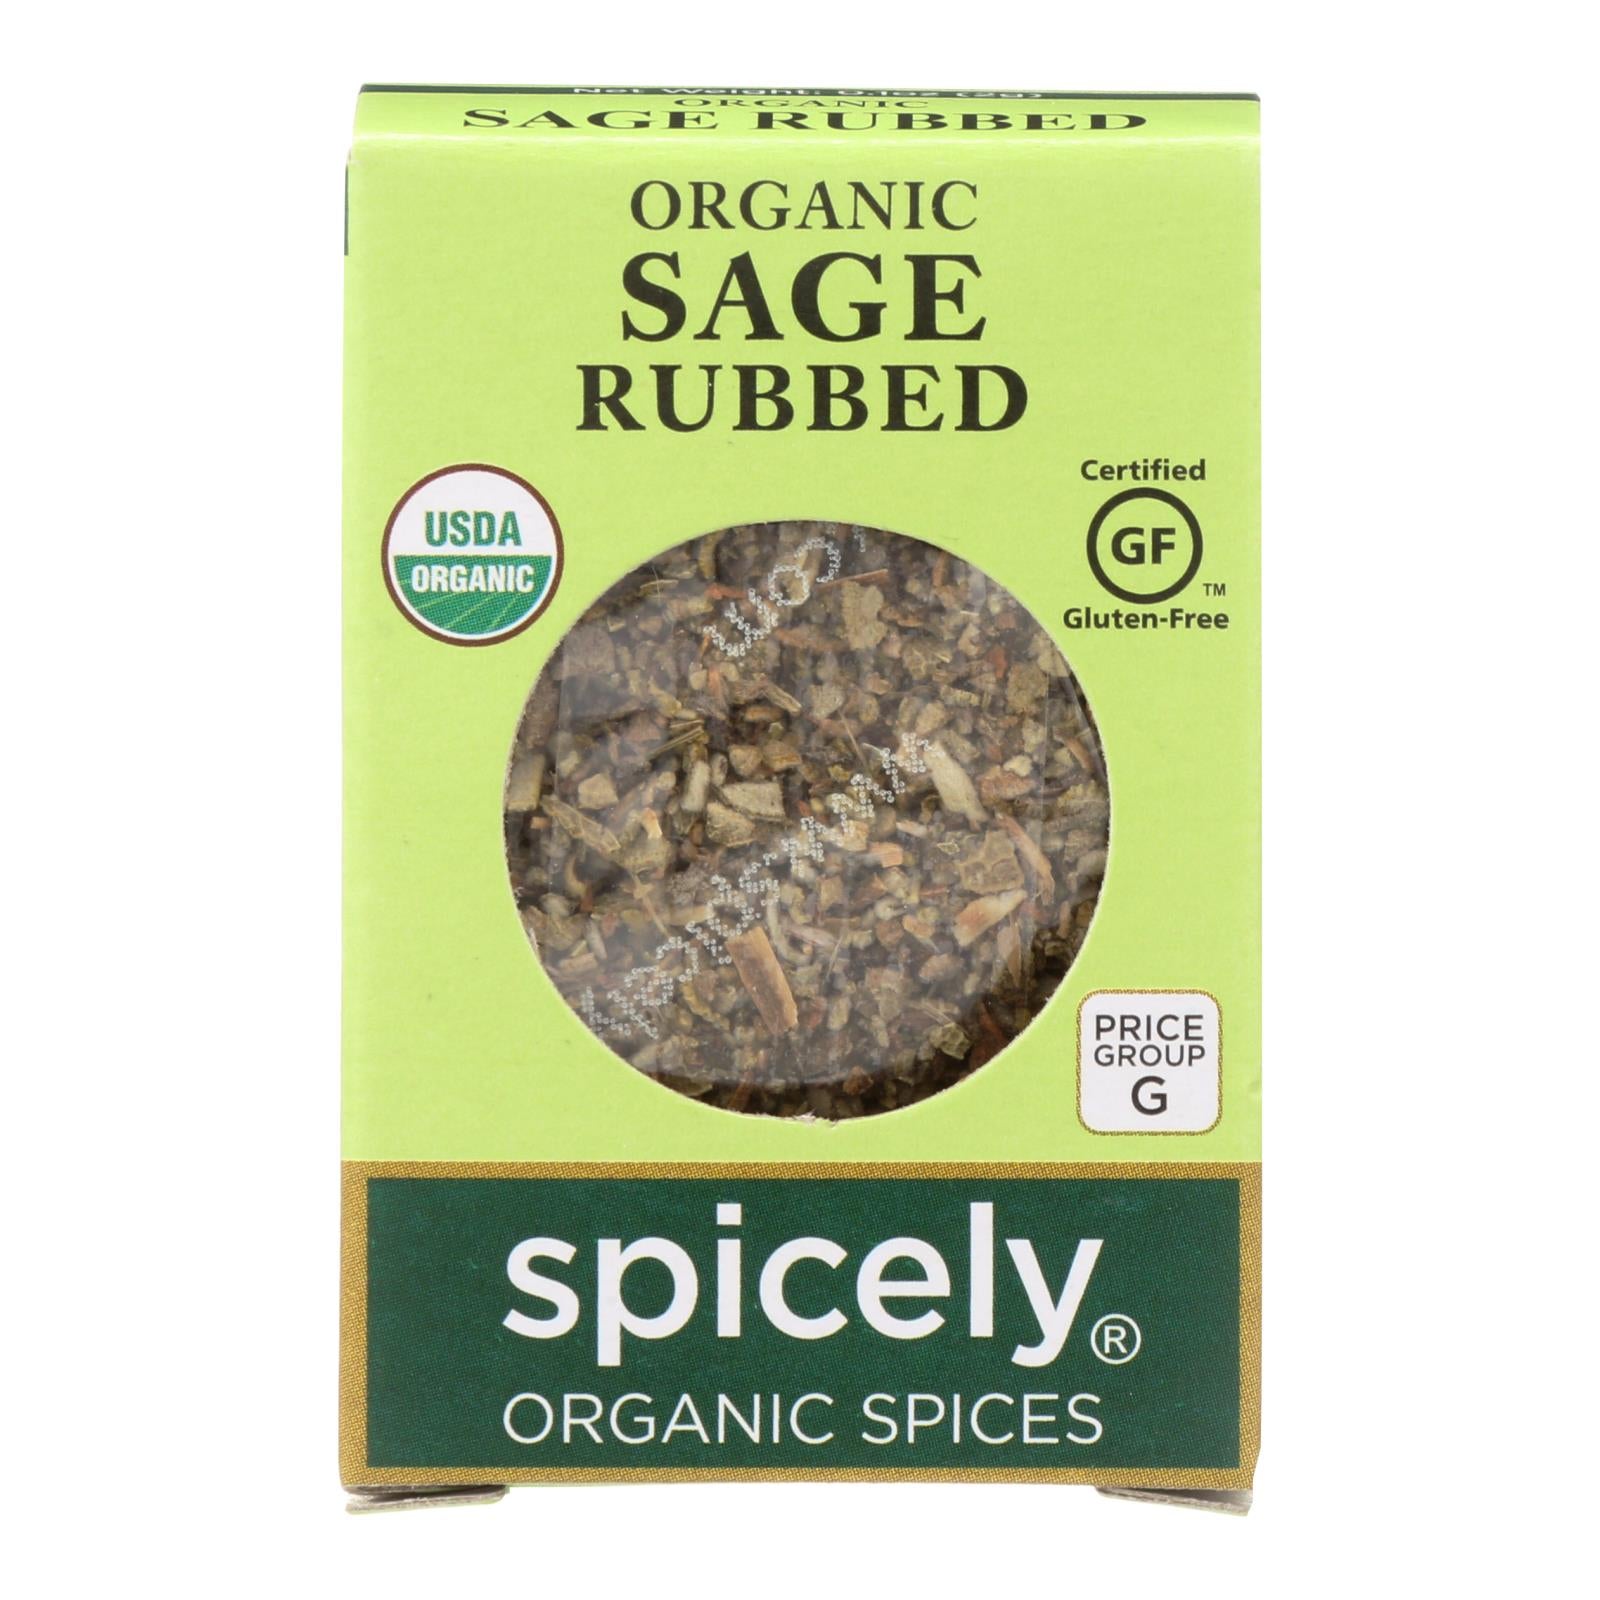 Spicely Organics - Organic Sage - Rubbed - Case Of 6 - 0.1 Oz. - Whole Green Foods